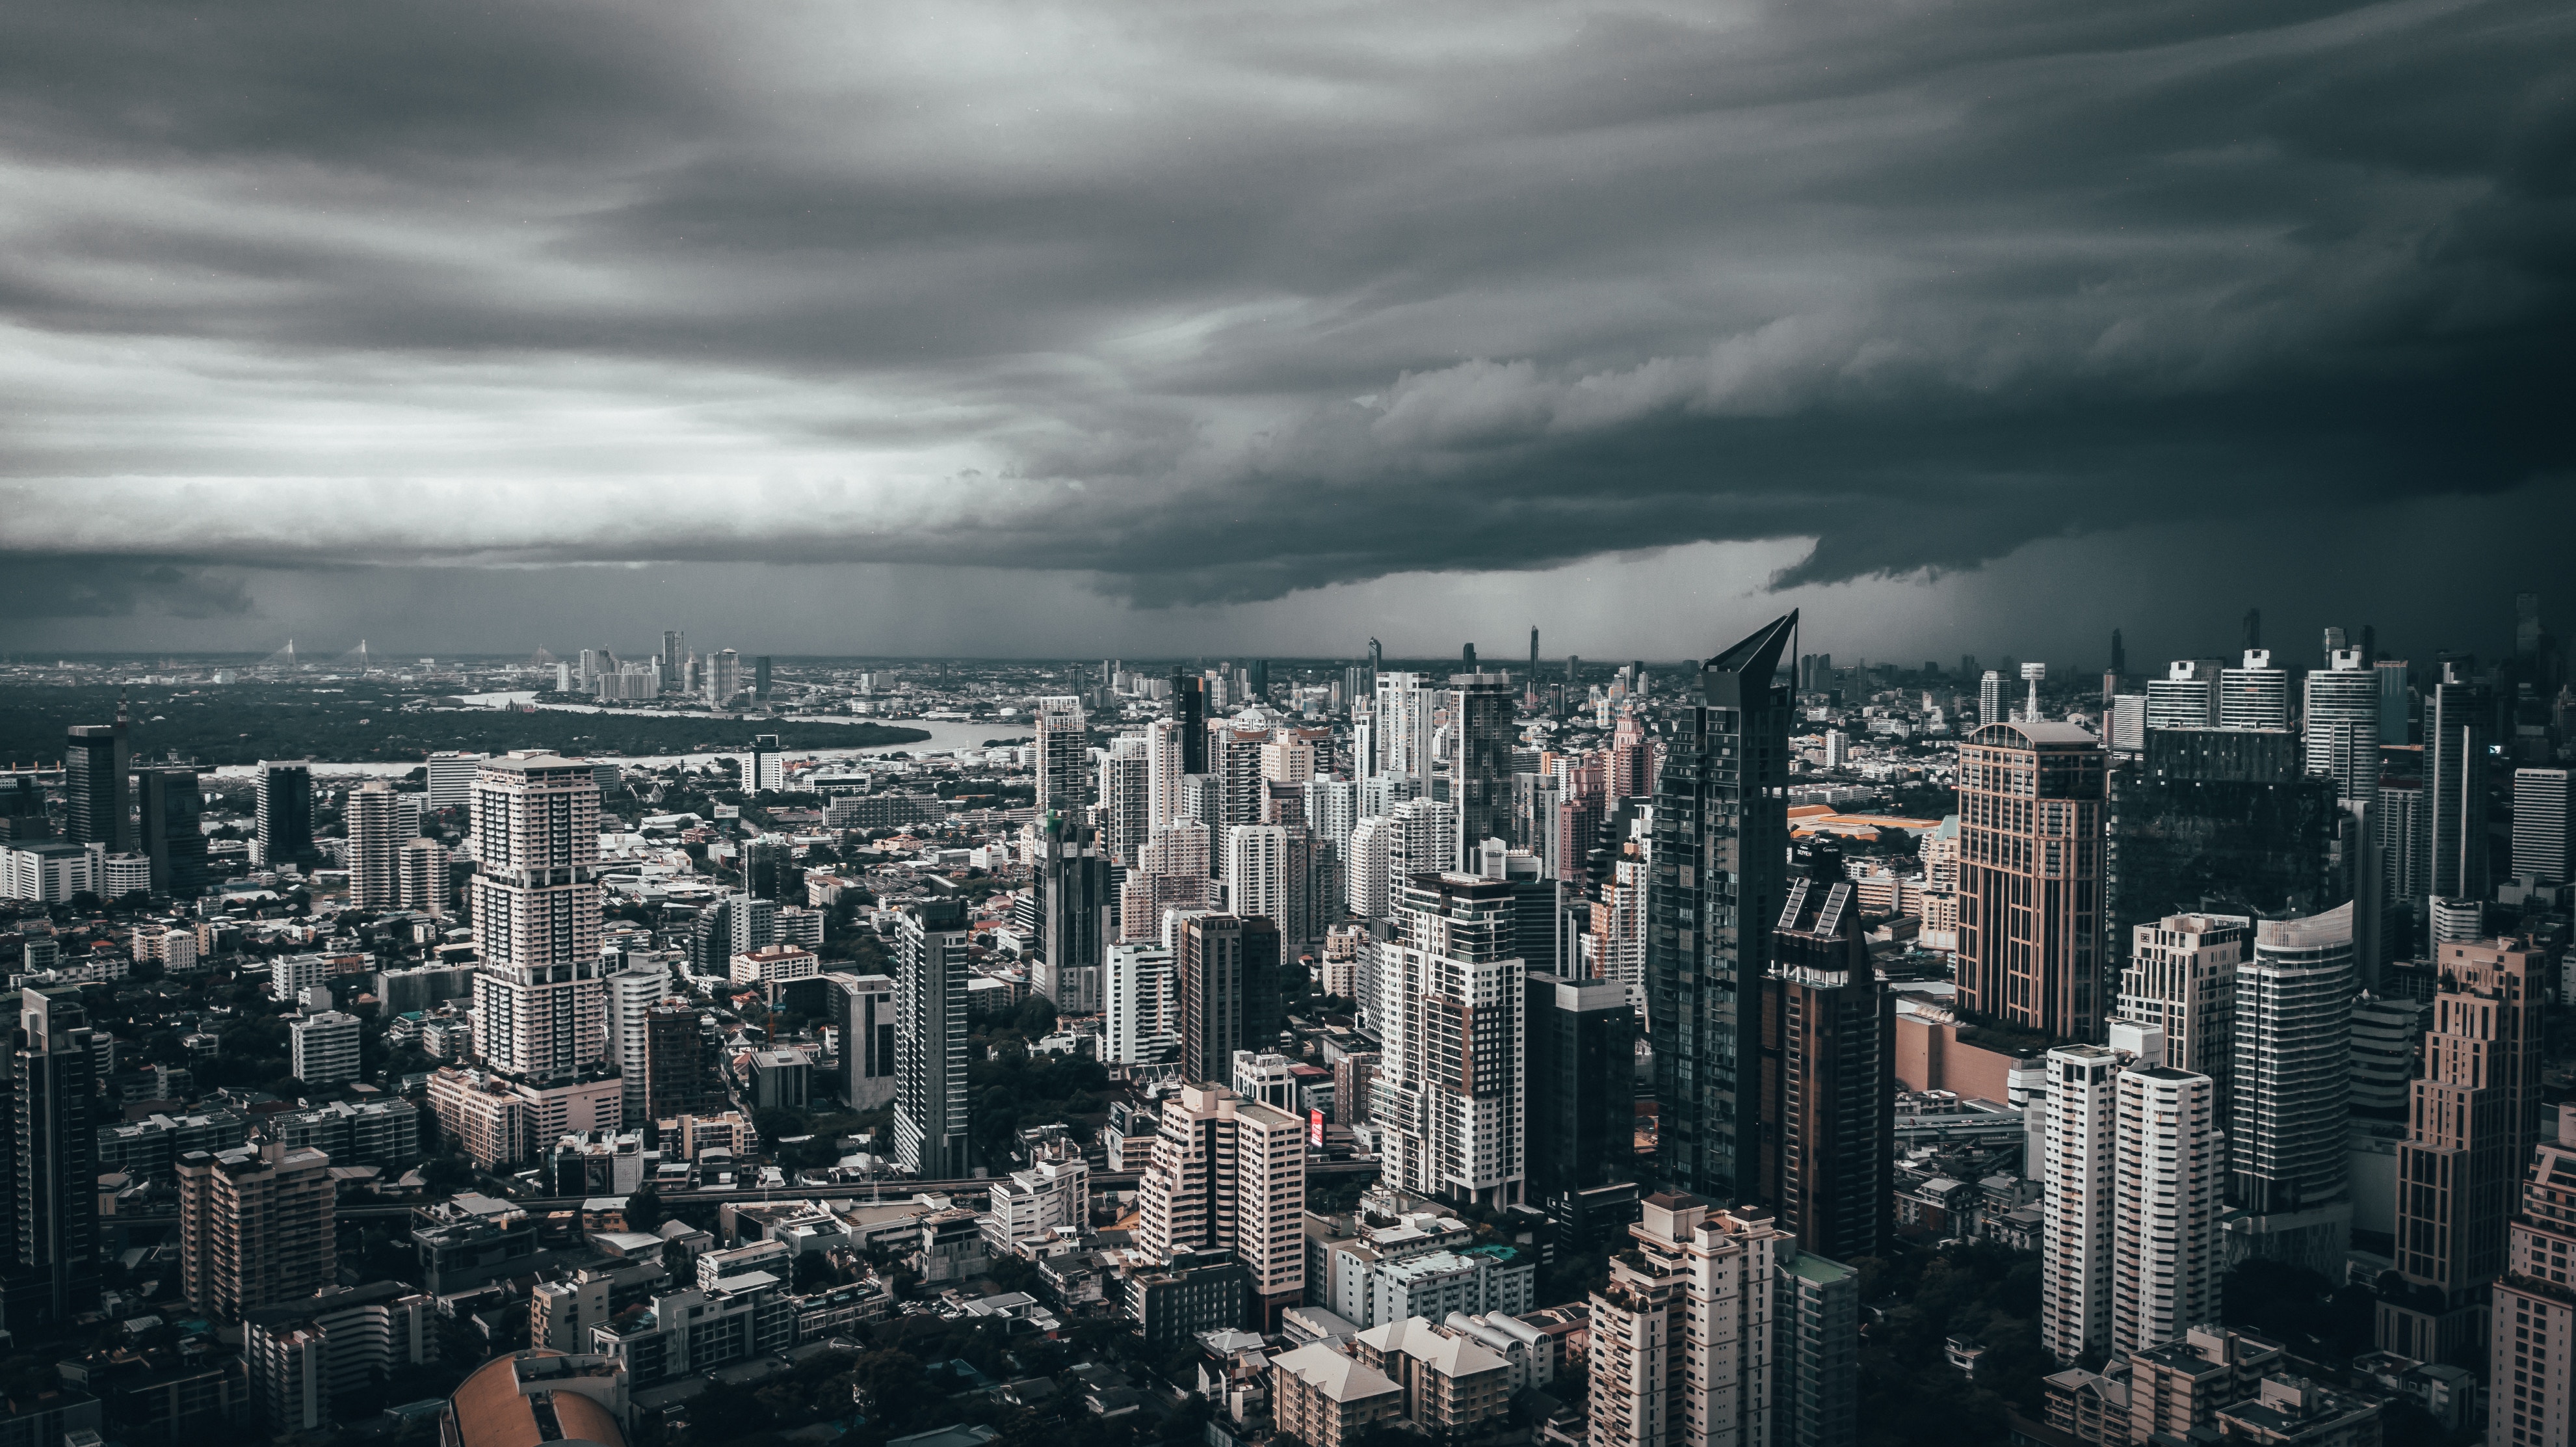 Download PC Wallpaper mainly cloudy, cities, clouds, city, view from above, skyscrapers, overcast